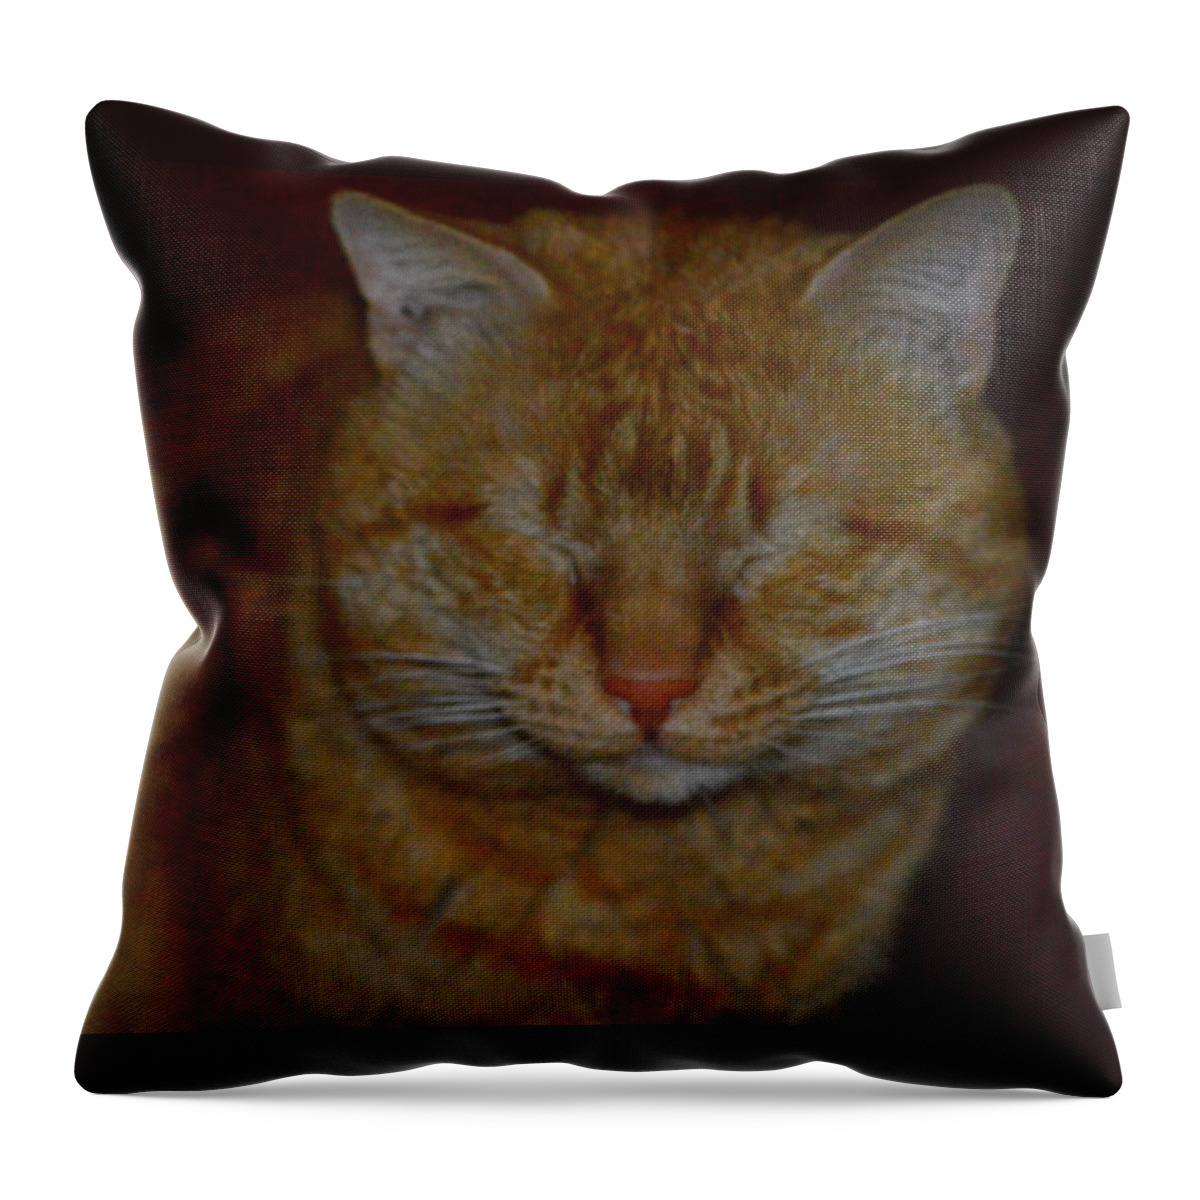 Cat Throw Pillow featuring the photograph You can't see me by Stacie Siemsen